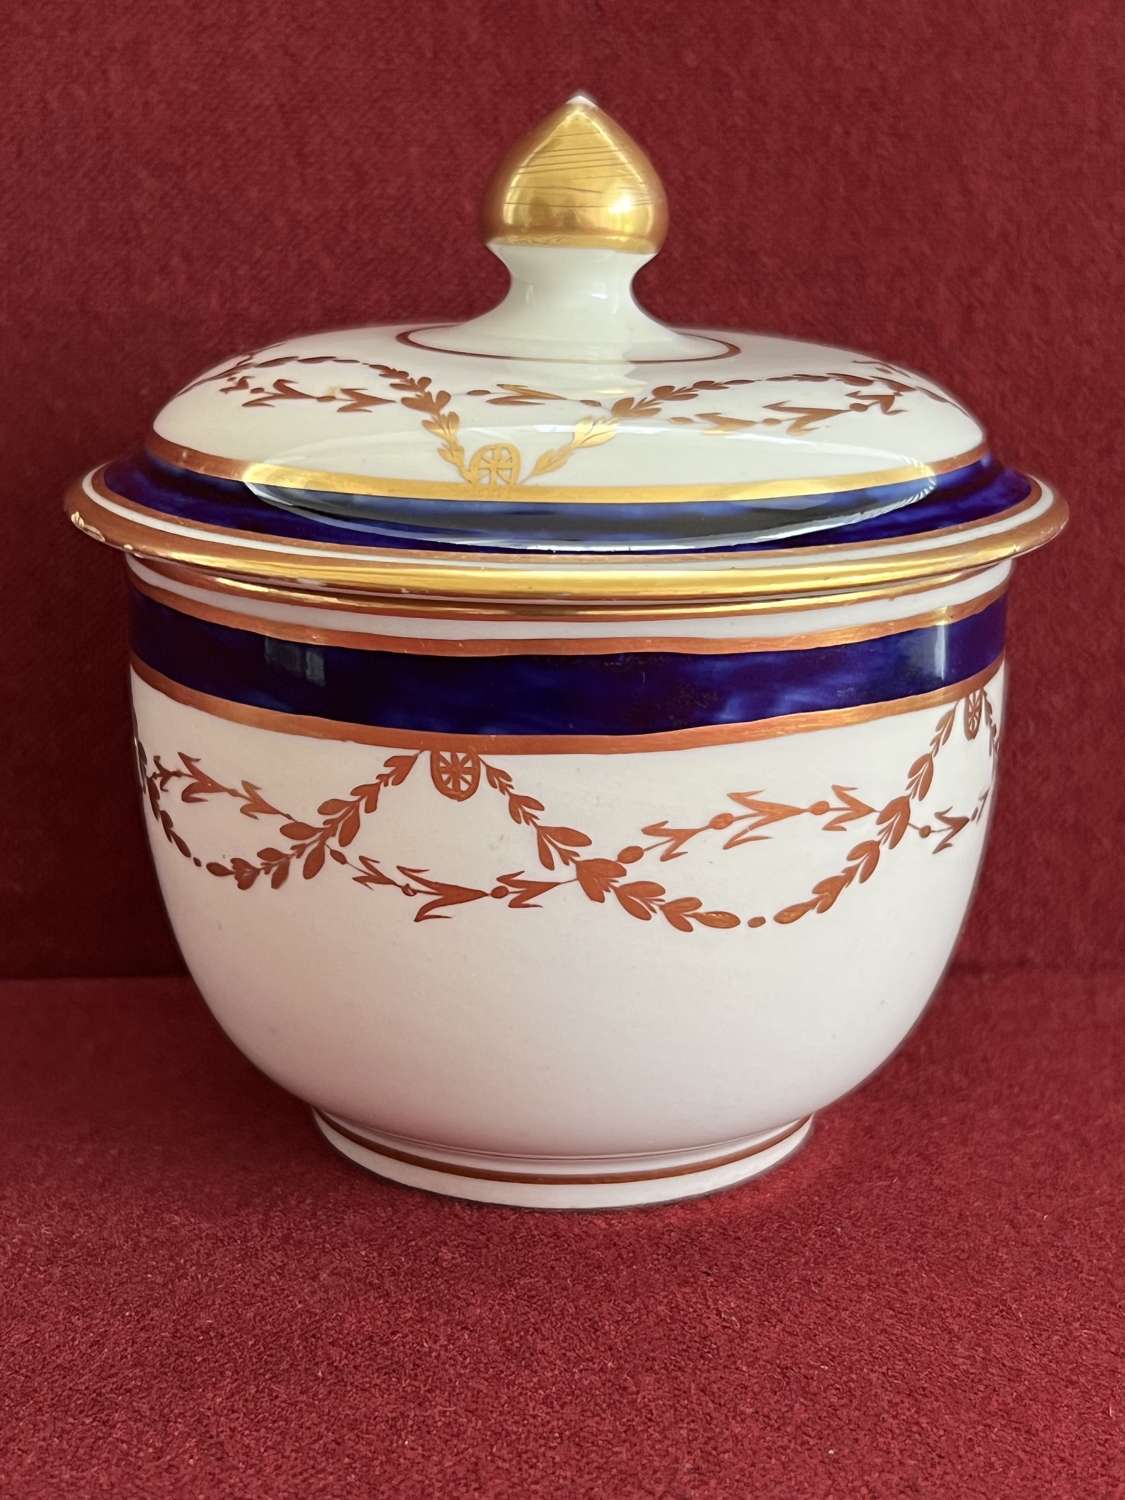 A rare early New Hall Porcelain covered Sugar Bowl c.1785 - 1790